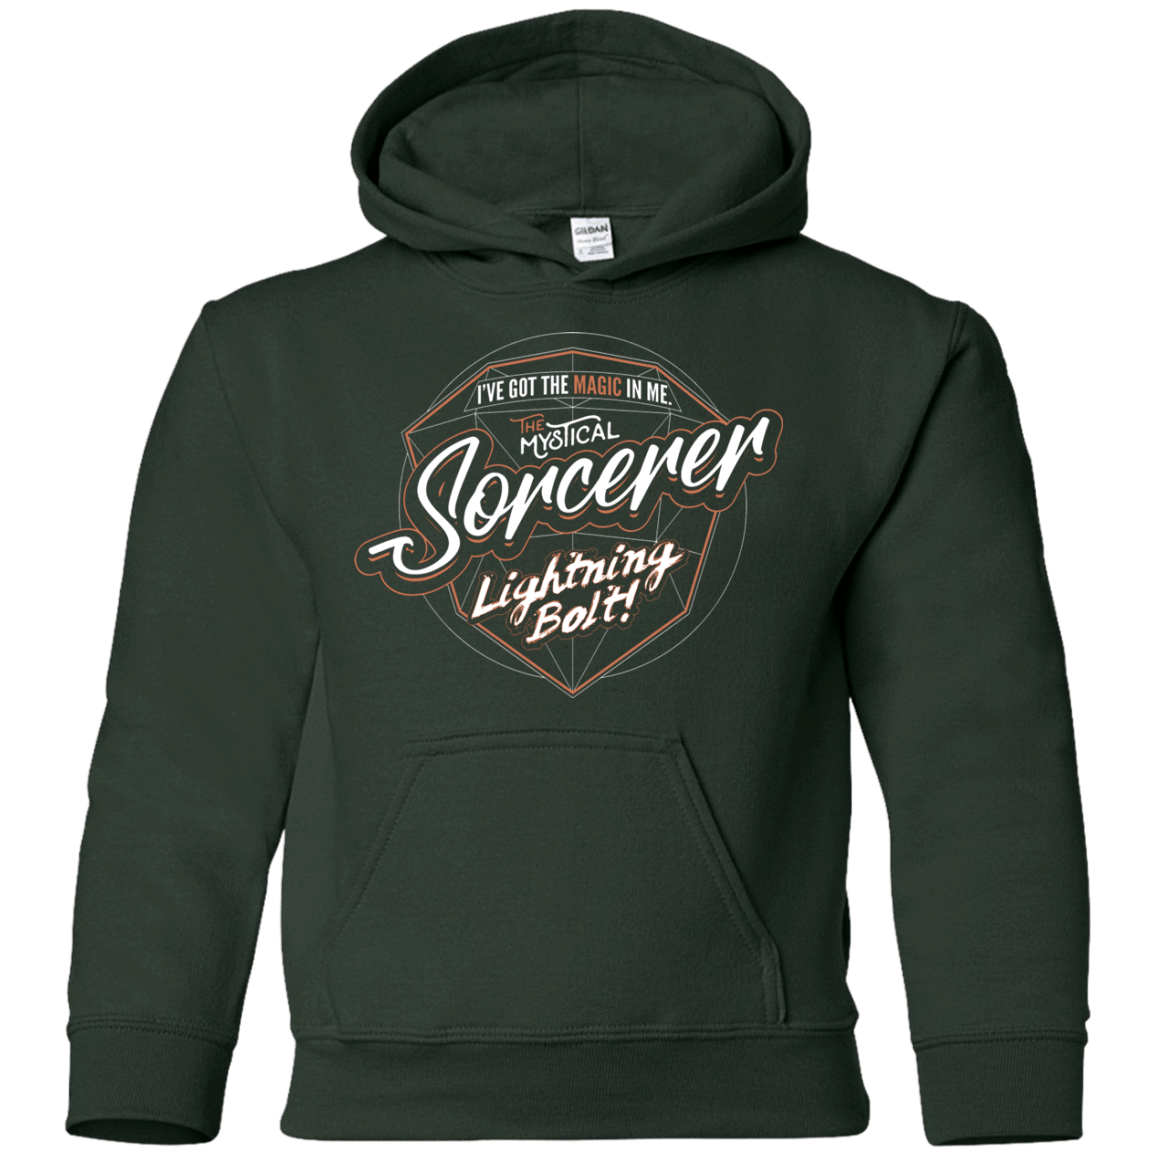 Sweatshirts Forest Green / YS Sorcerer Youth Hoodie